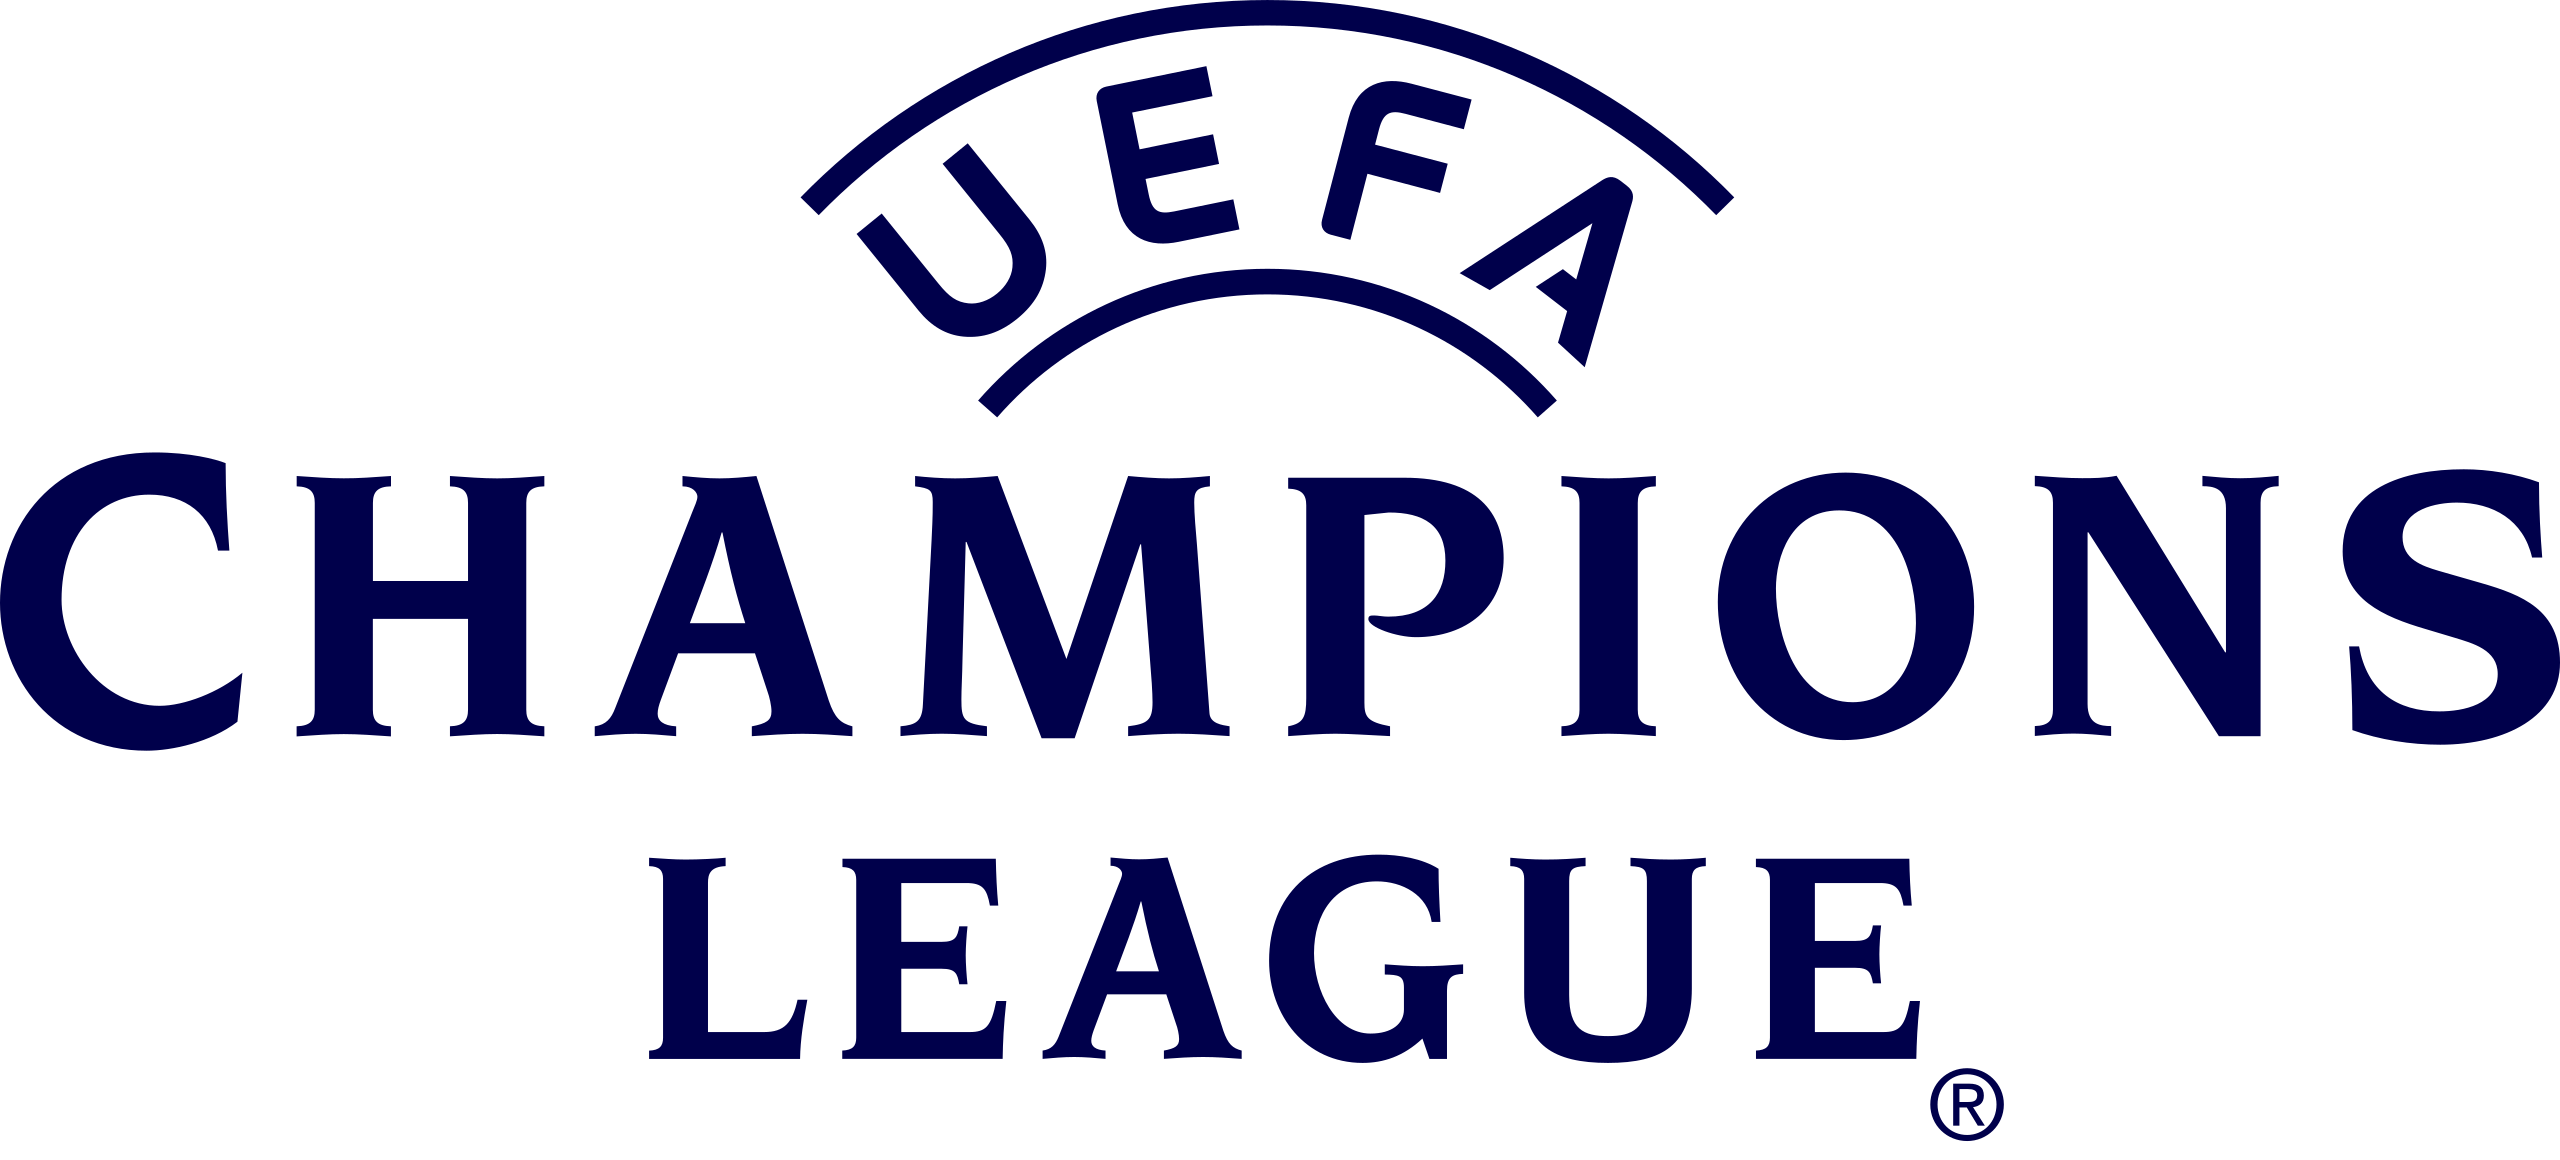 UEFA Champions League Background PNG Image